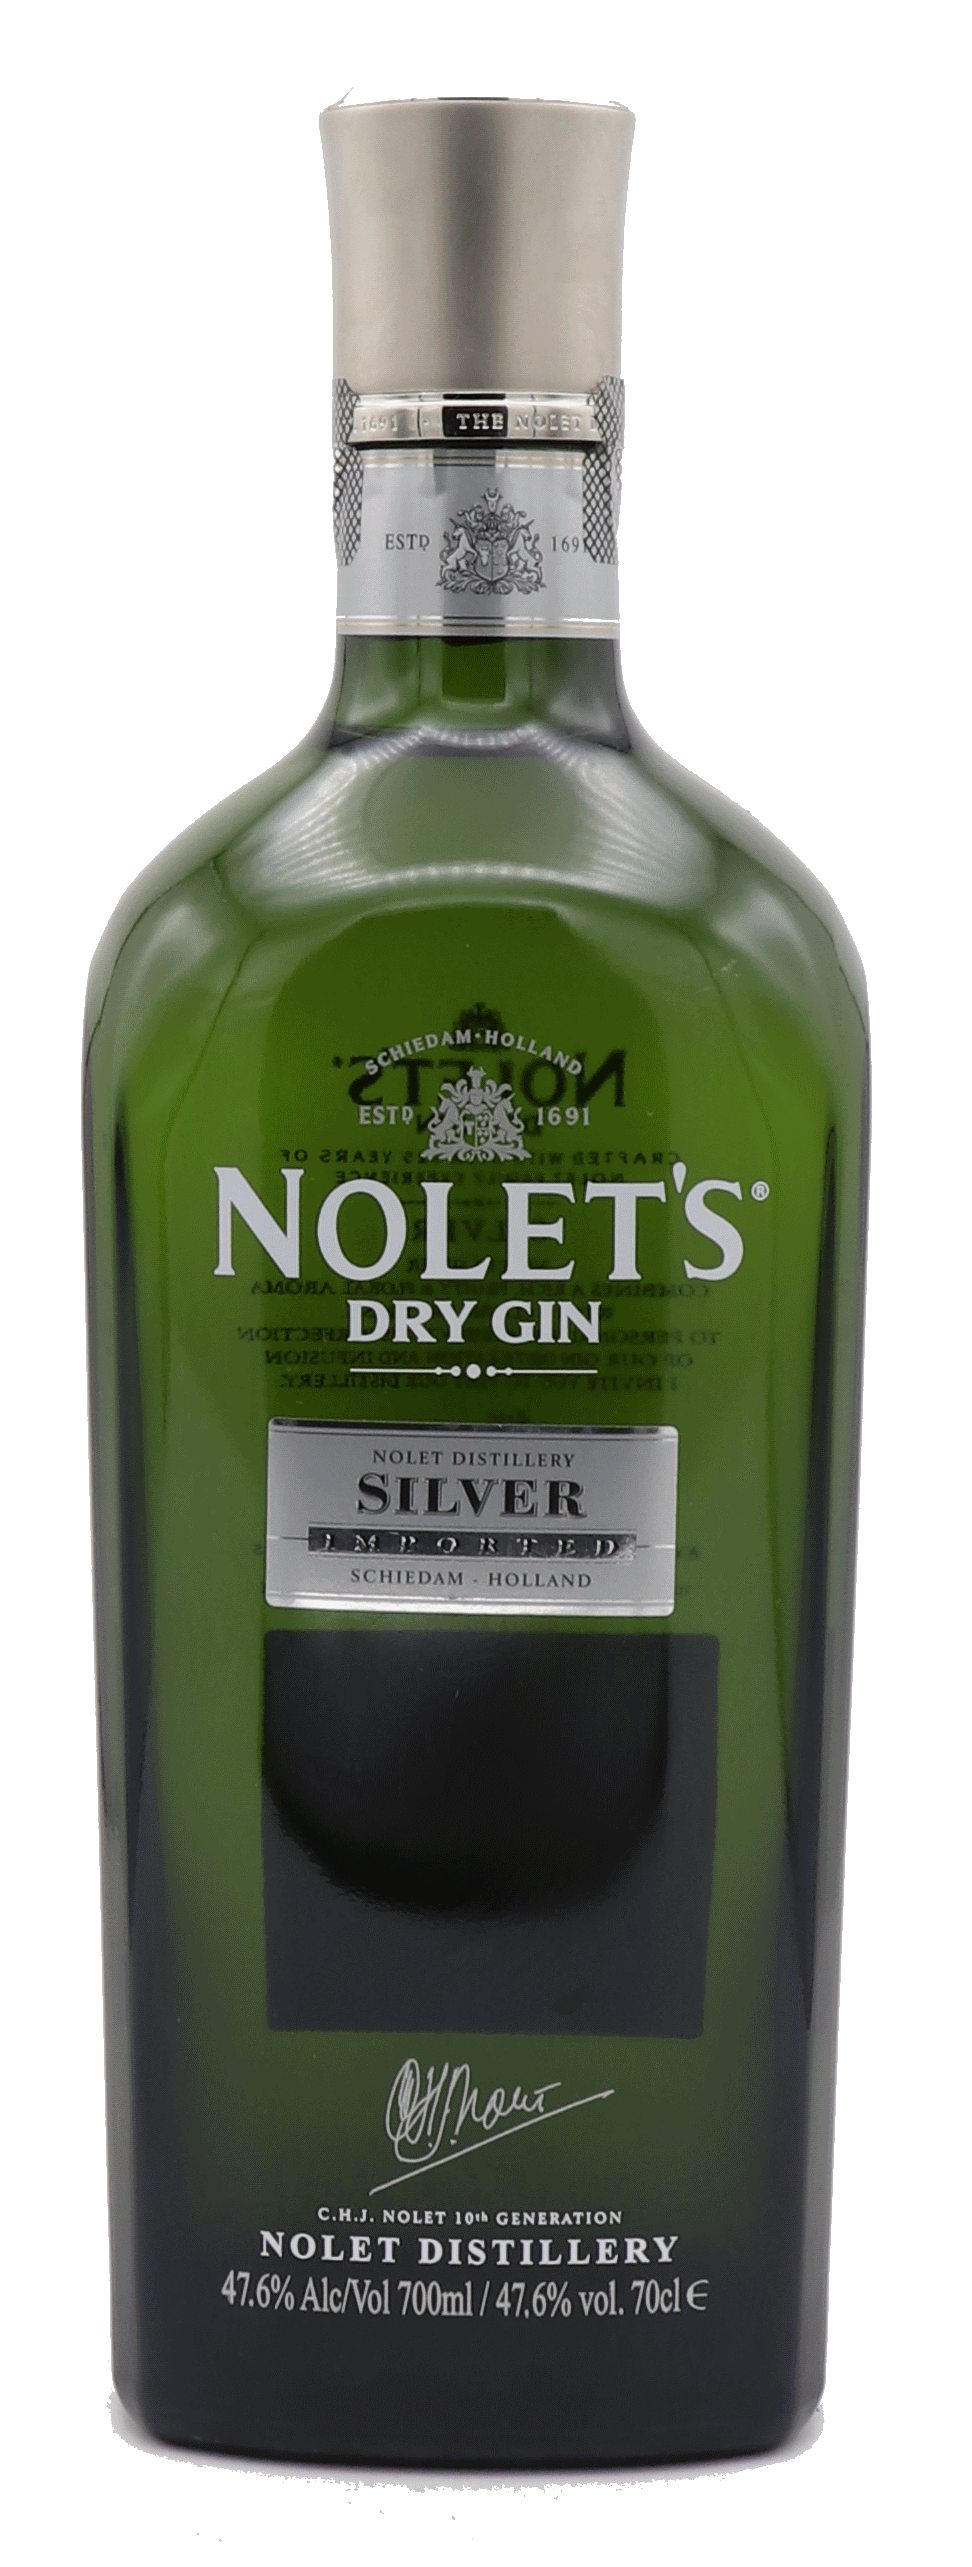 Nolets dry Gin